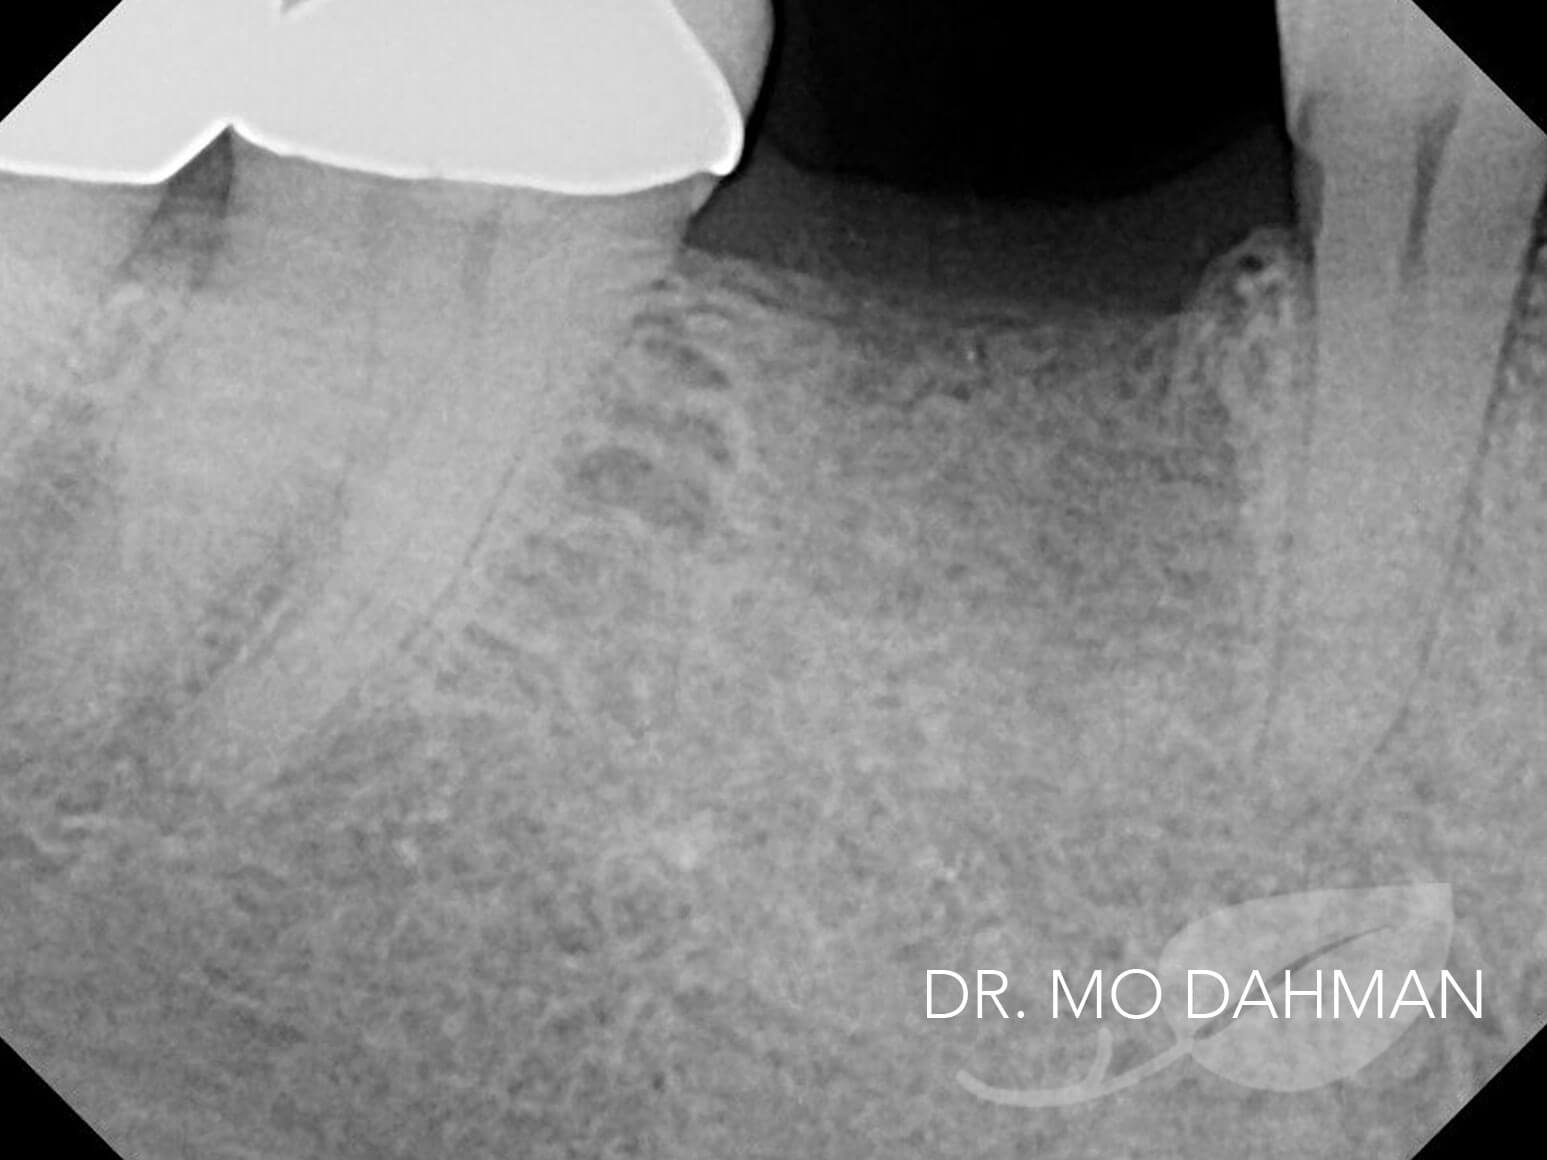 Case 02 xray process with a gap